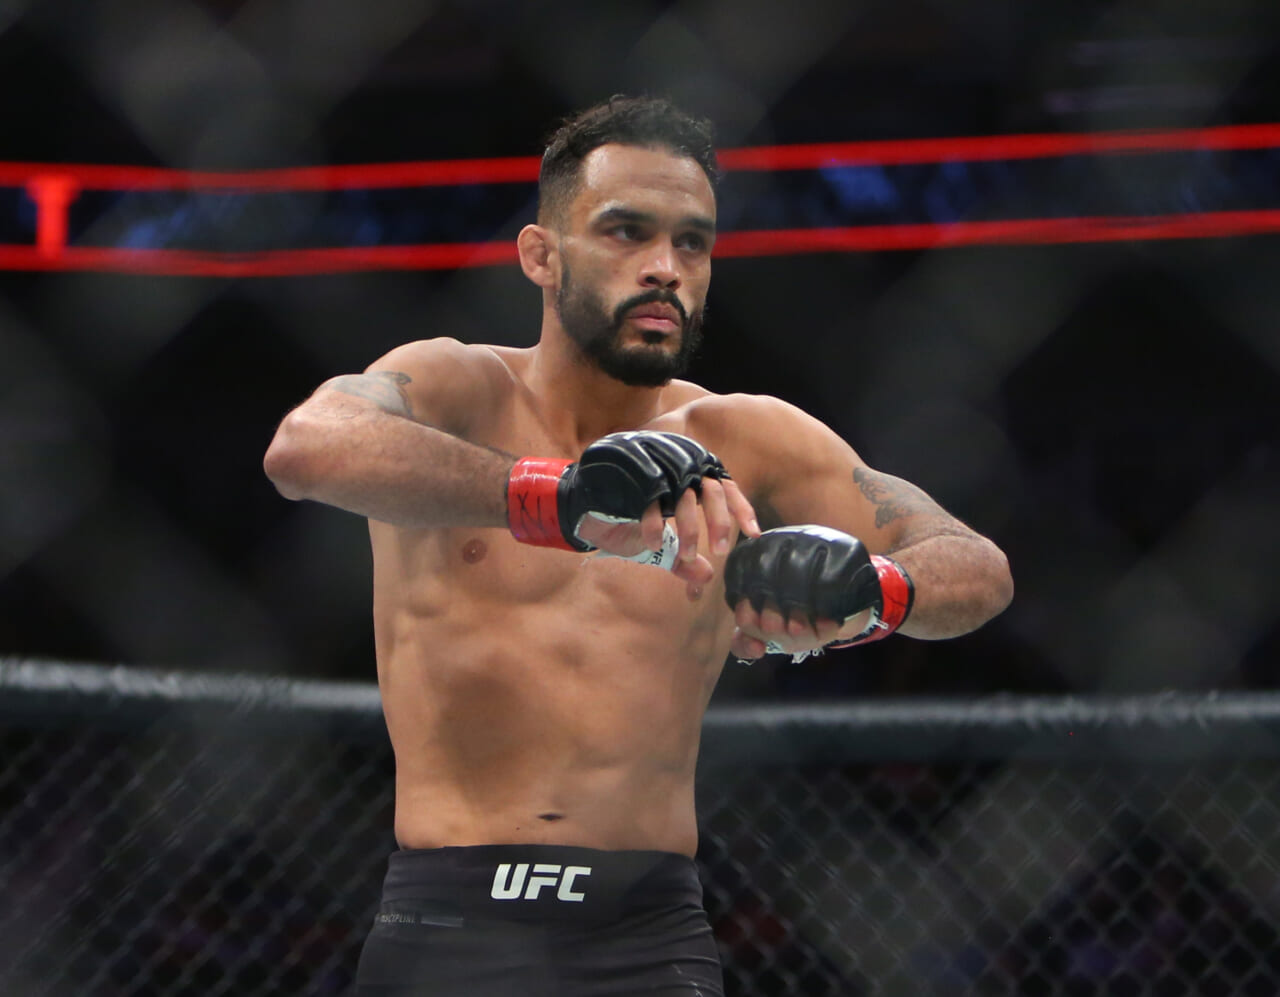 After coming up short at UFC Vegas 44, what’s next for Rob Font?